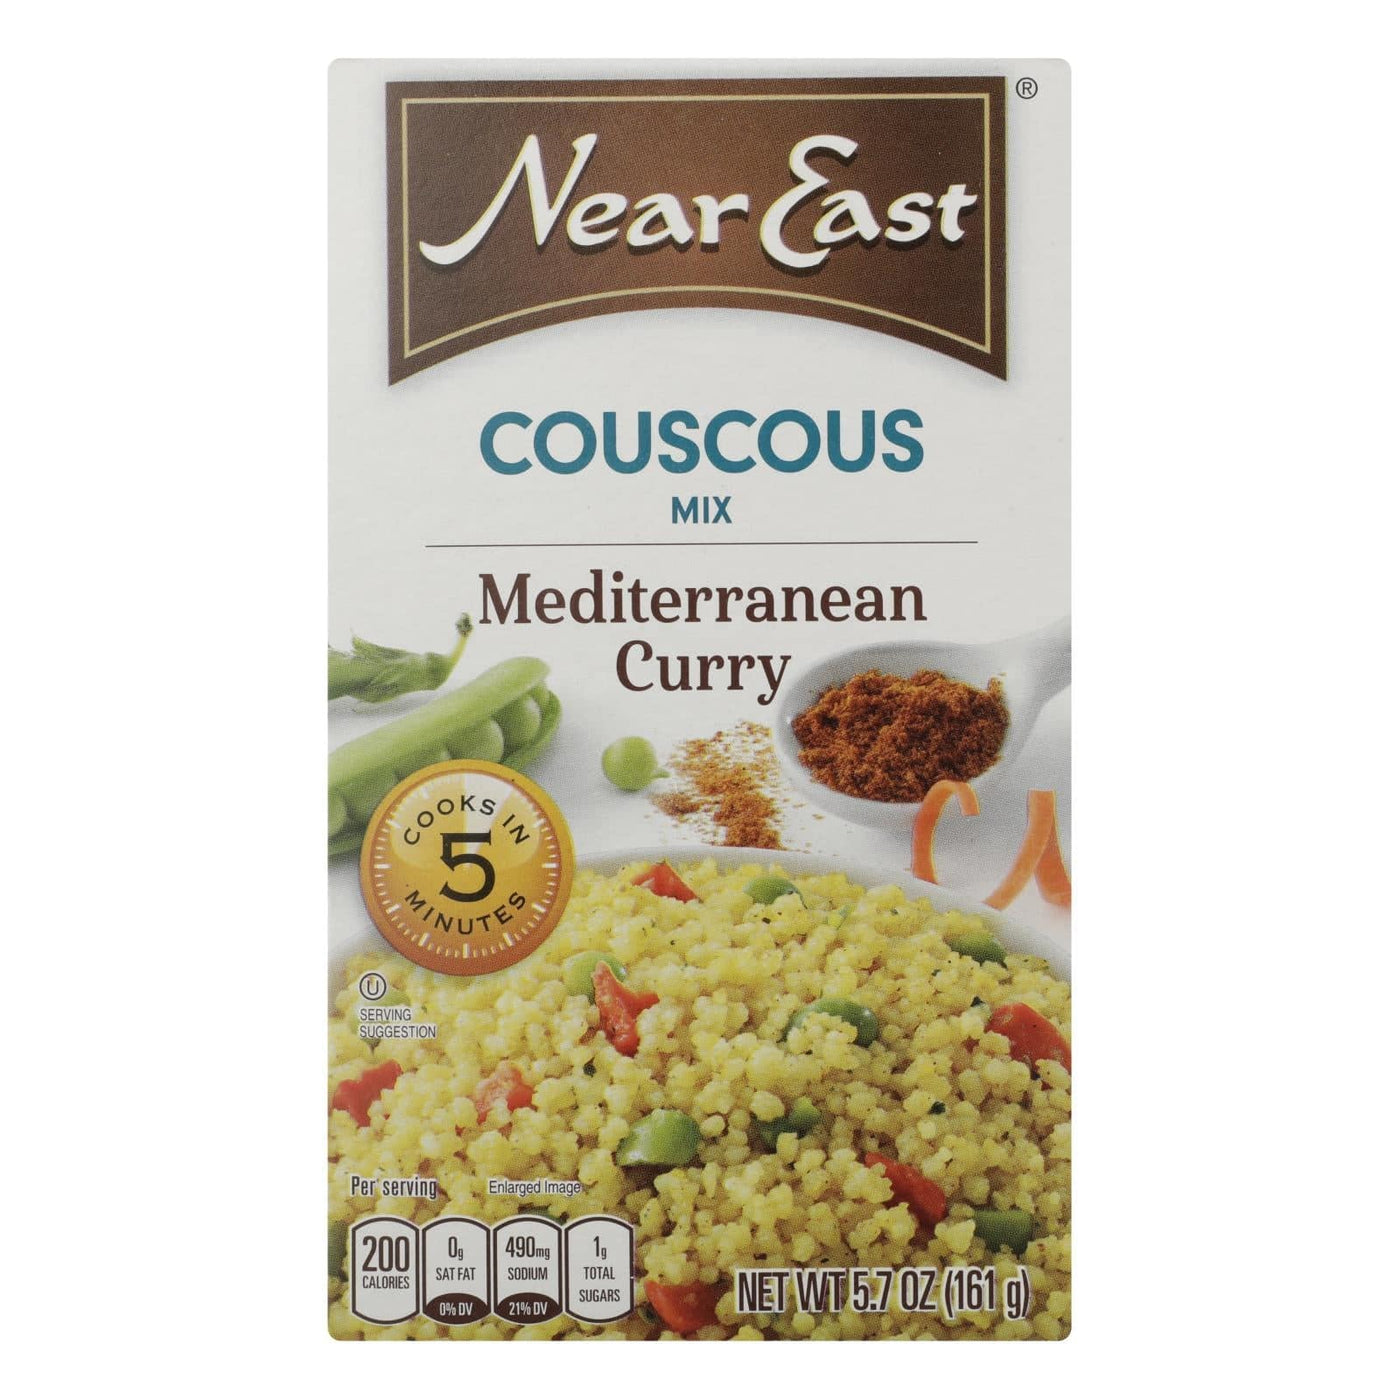 Near East Couscous Mix - Mediterranean Curry - Case Of 12 - 5.7 Oz. | OnlyNaturals.us